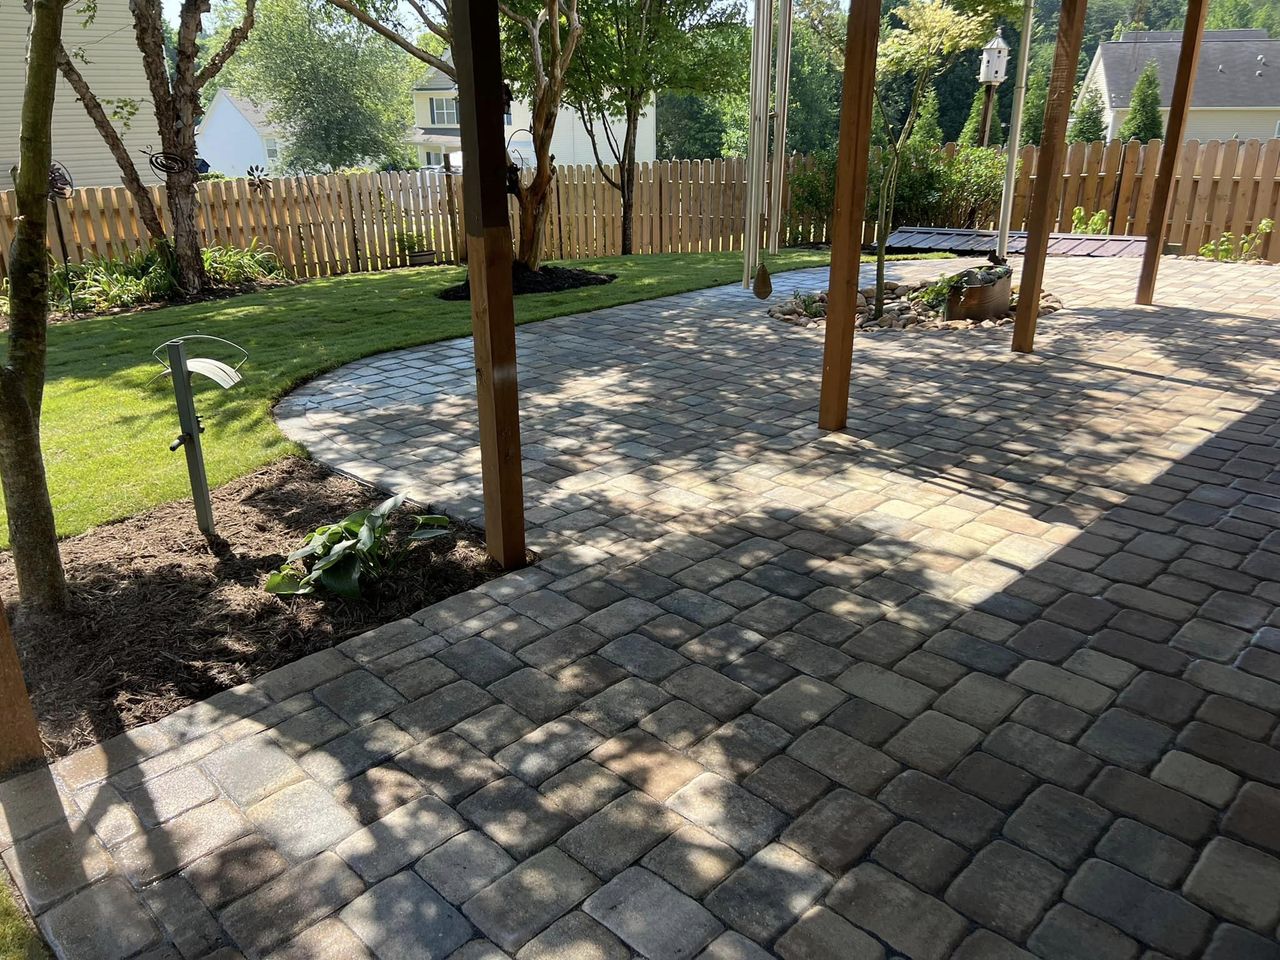 Paver Patio and New Lawn